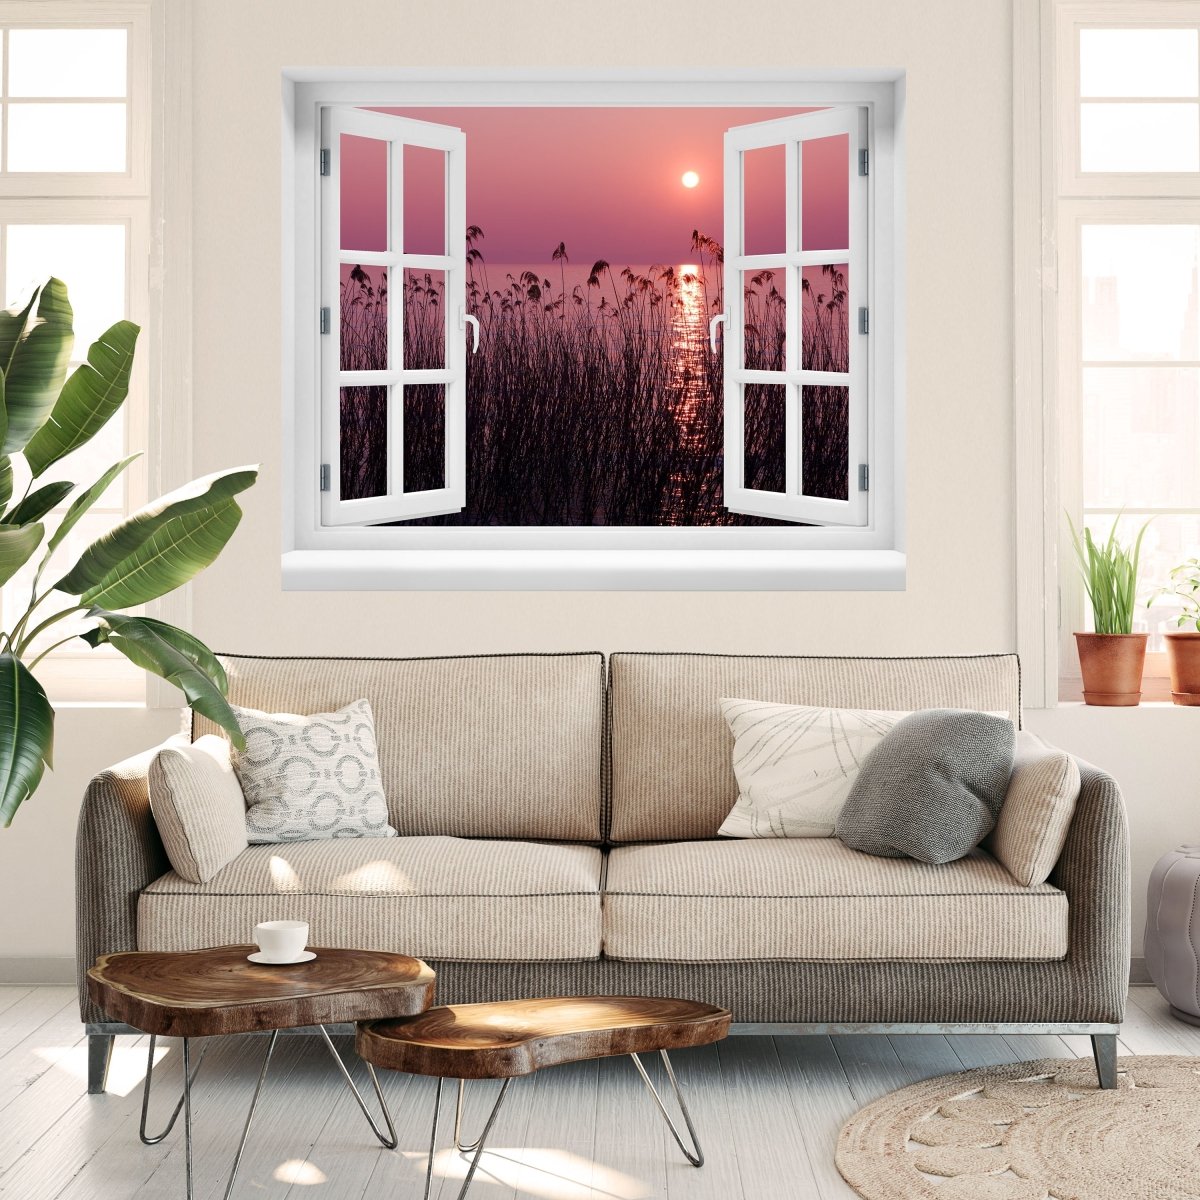 3D wall sticker lake in the sunset nature - wall decal M0172